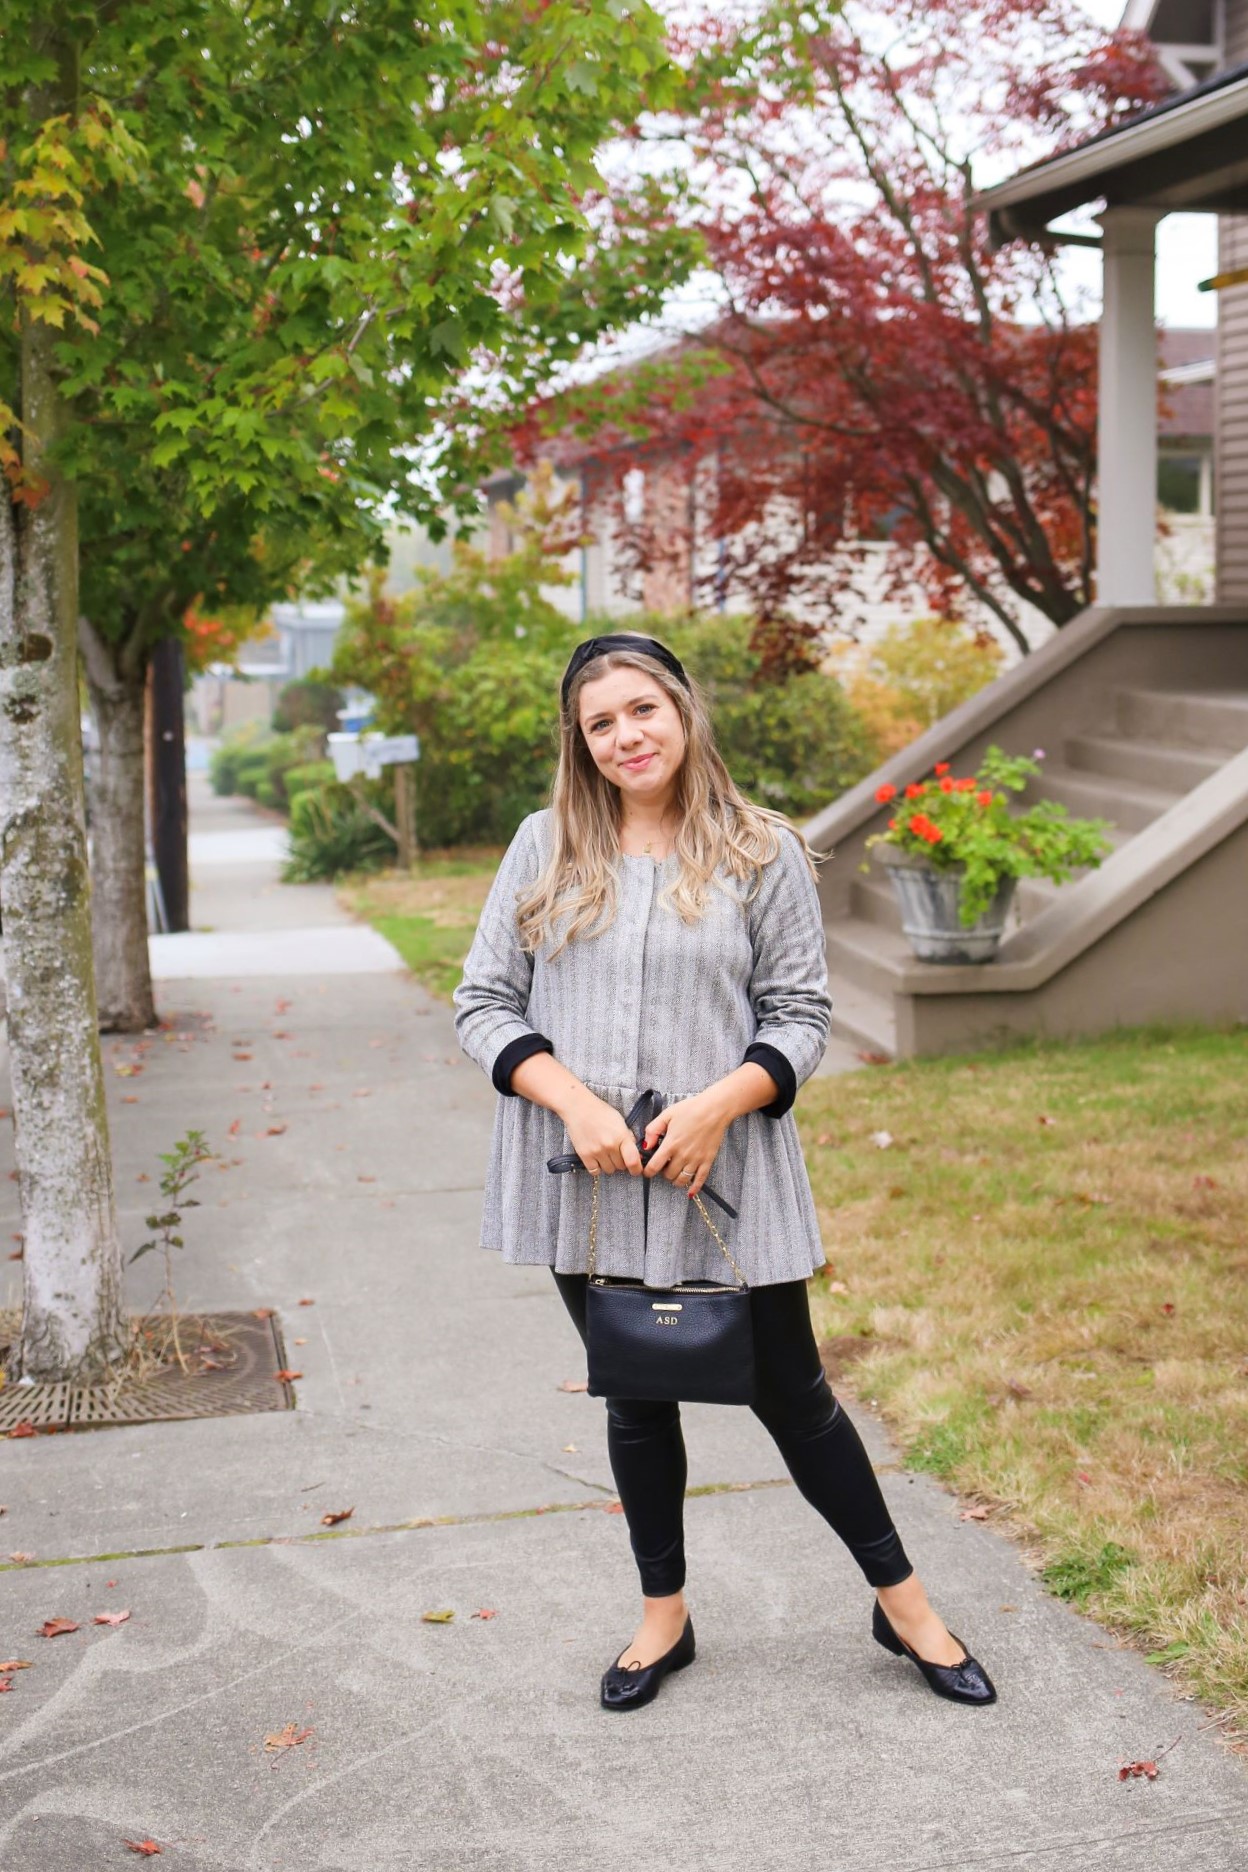 How to Style Leather Leggings: 8 Easy Ideas for Everyday Wear